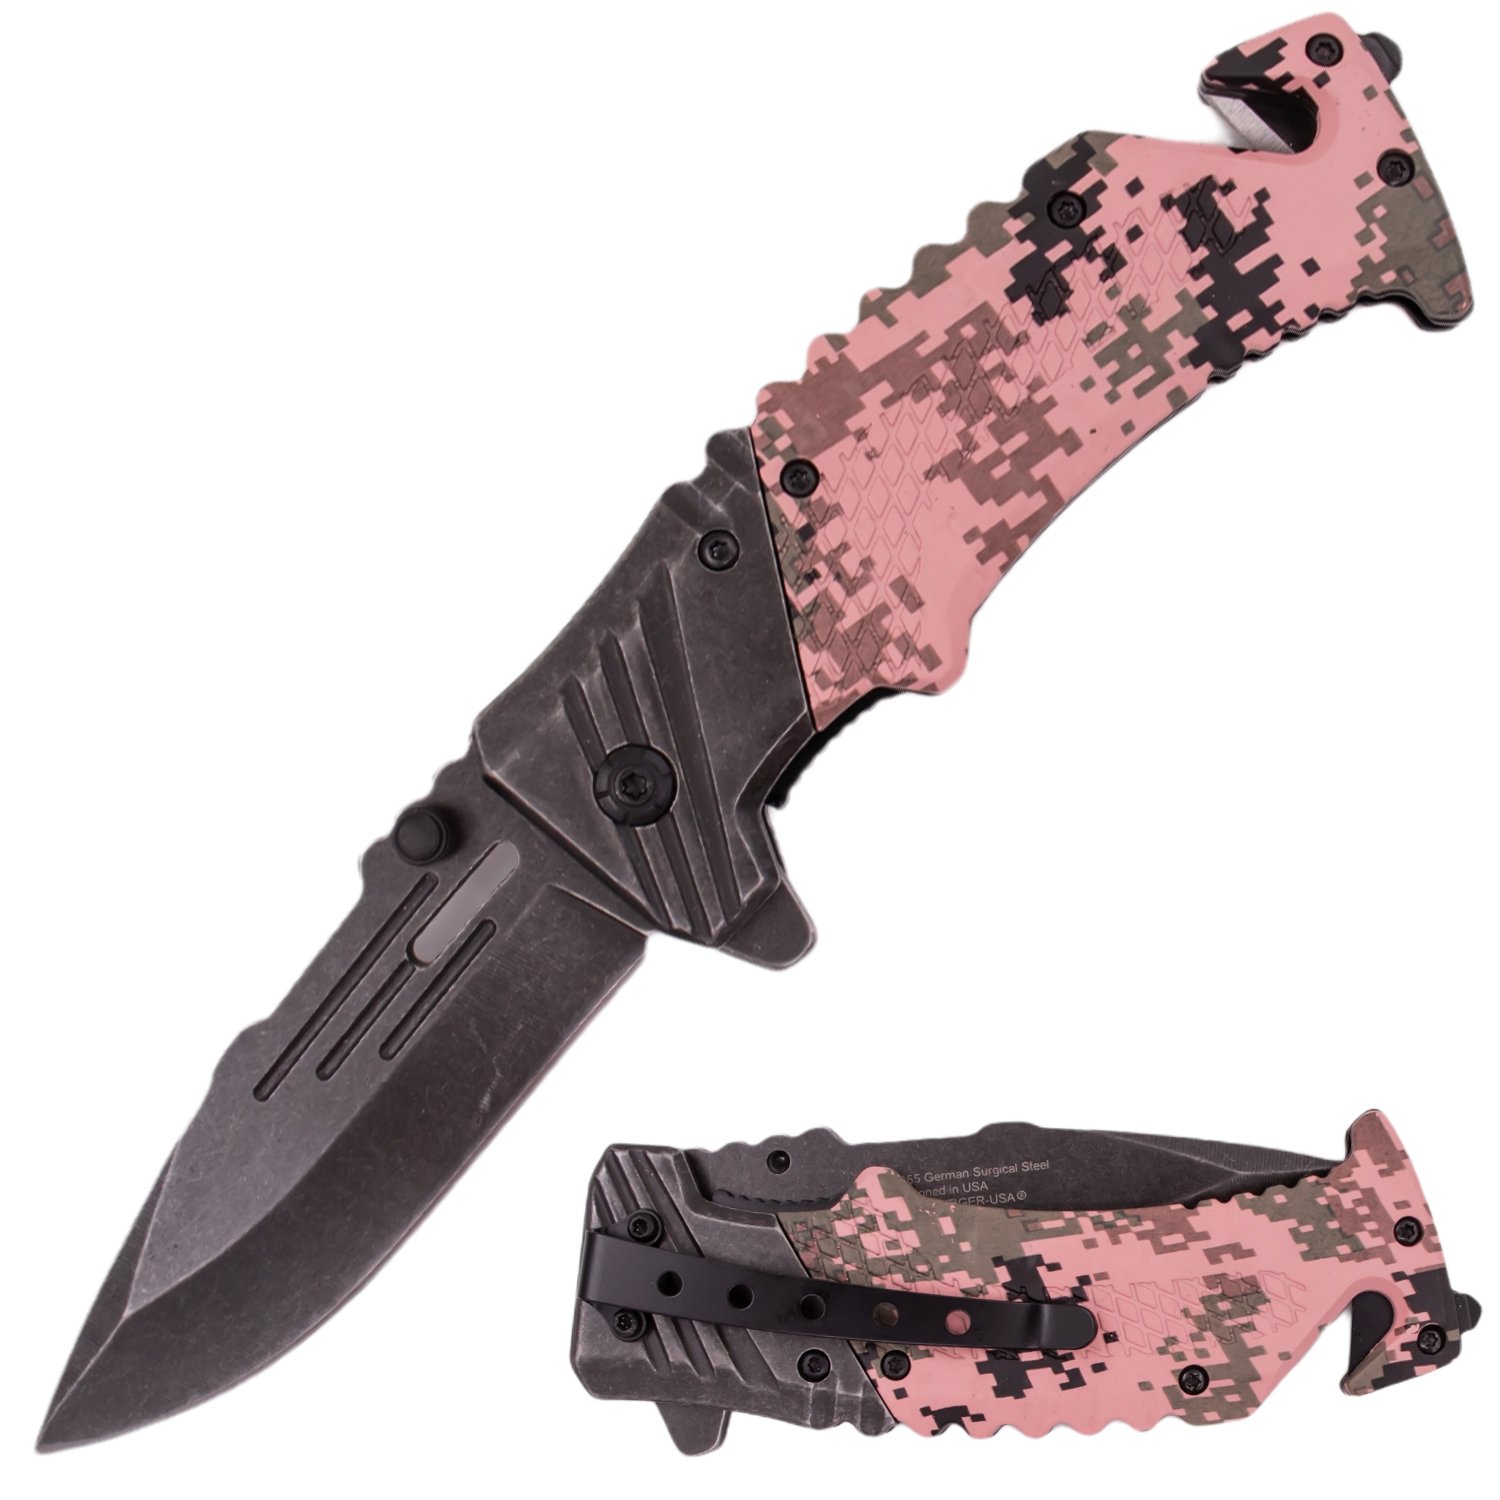 7 Inch Tiger USA Ergonomic Grip Stonewashed Spring Assisted Knife   Camo Pink